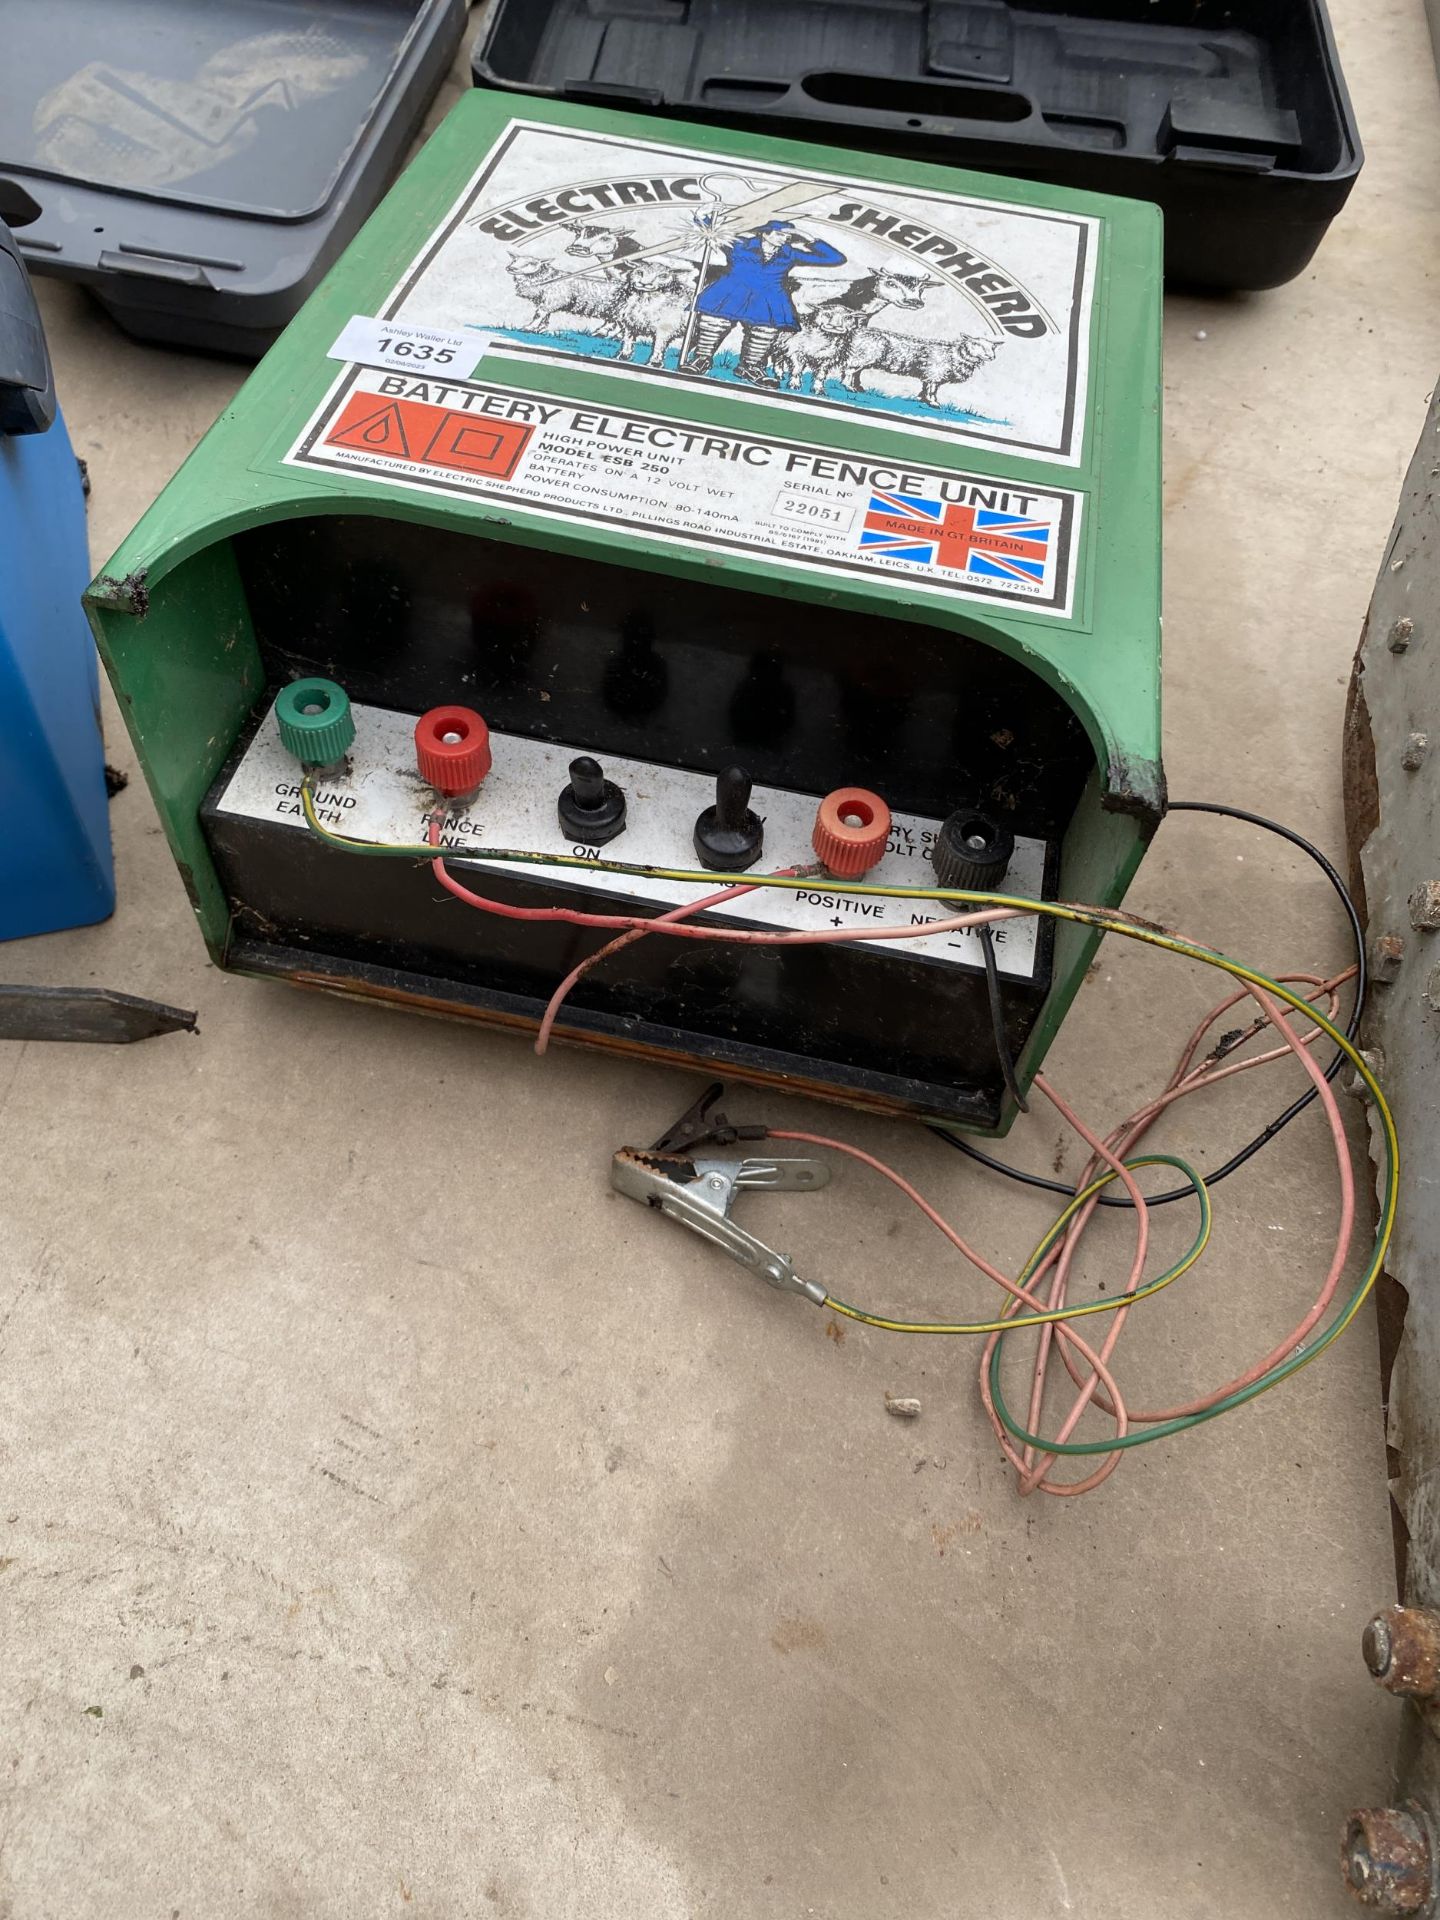 AN ELECTRIC SHEPARD BATTERY ELECTRIC FENCE UNIT